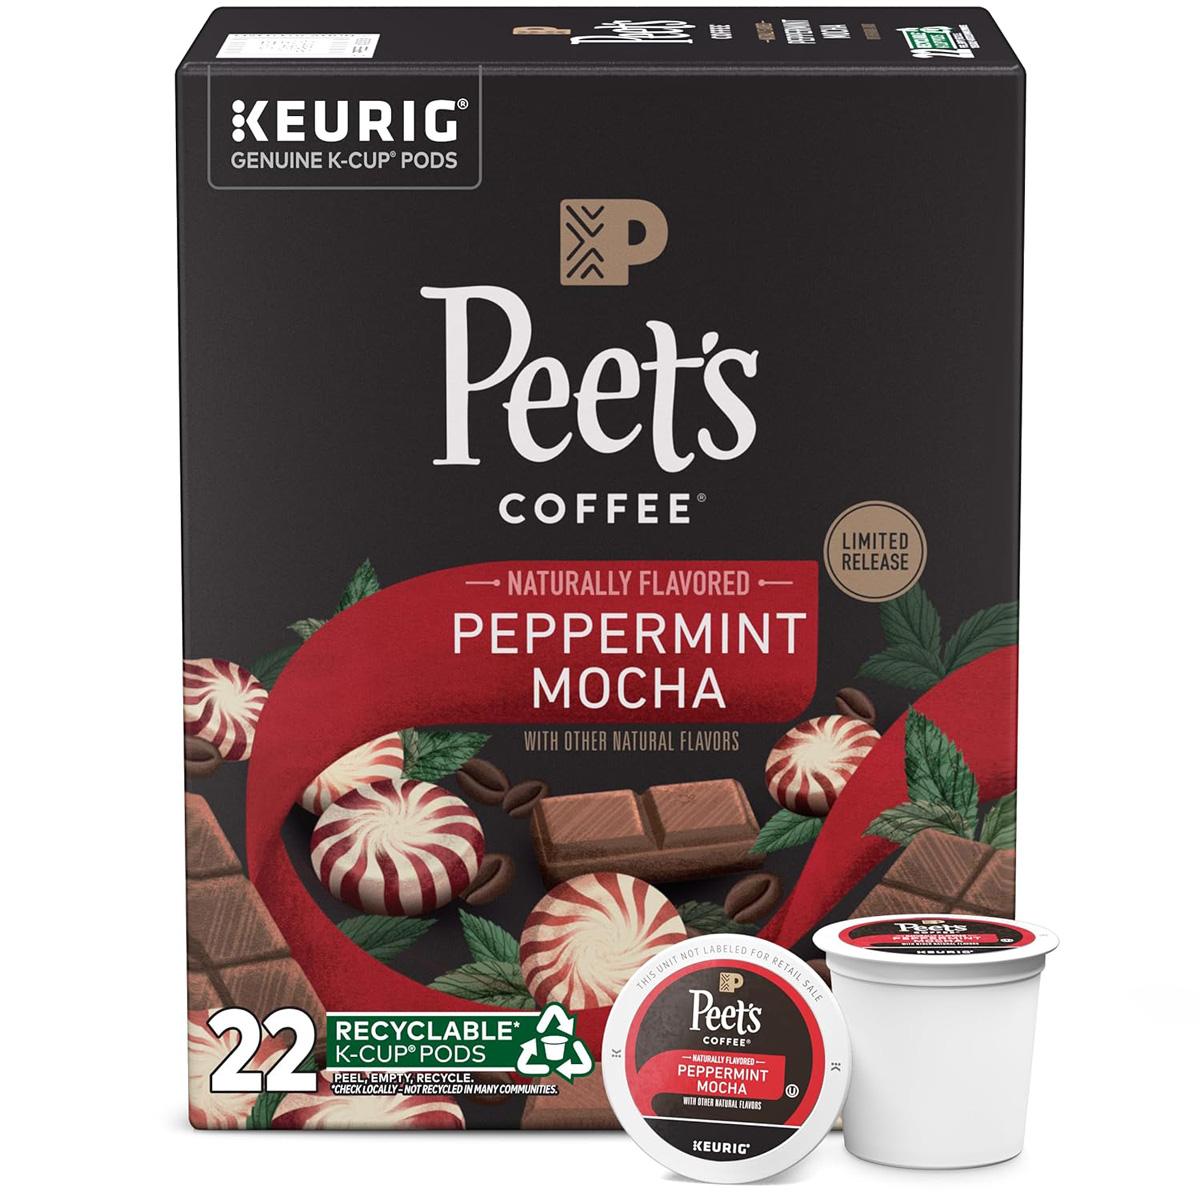 Peets Coffee Peppermint Mocha K-Cup Pods 22 Pack for $11.50 Shipped